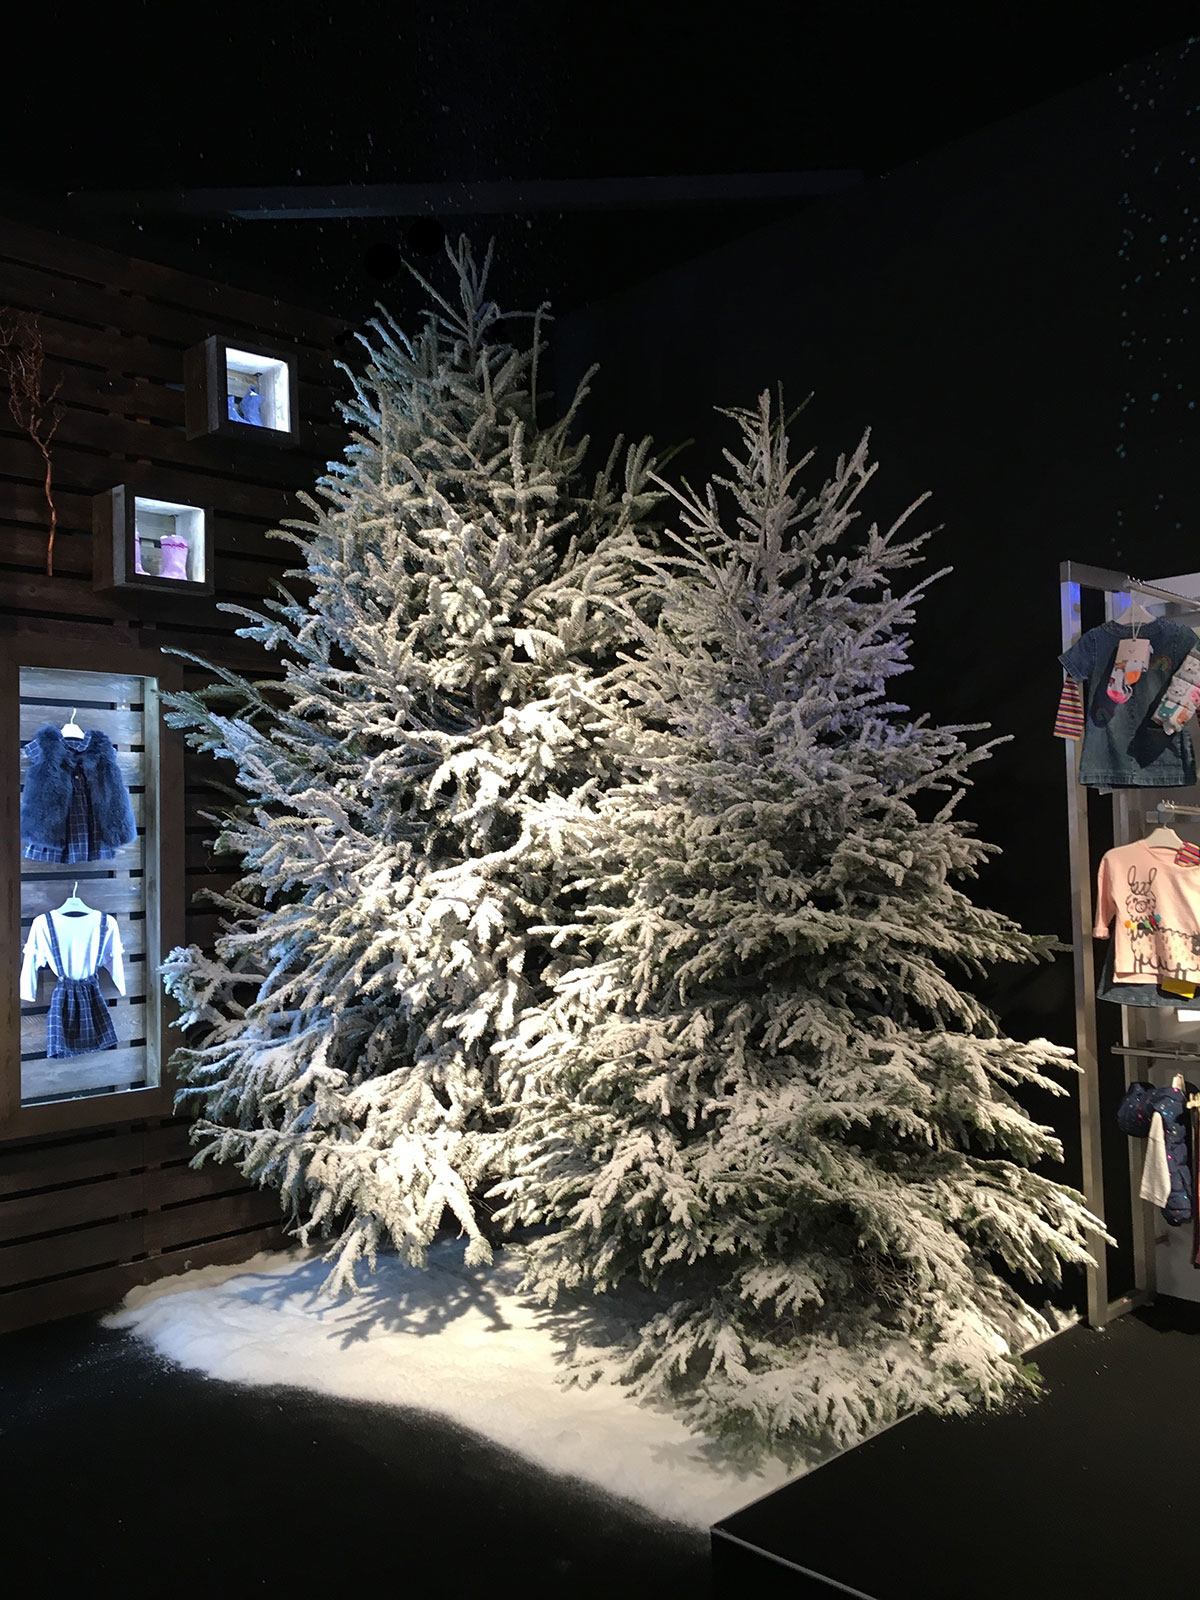 2 large flocked Christmas trees create a winter scene for a clothing retailer